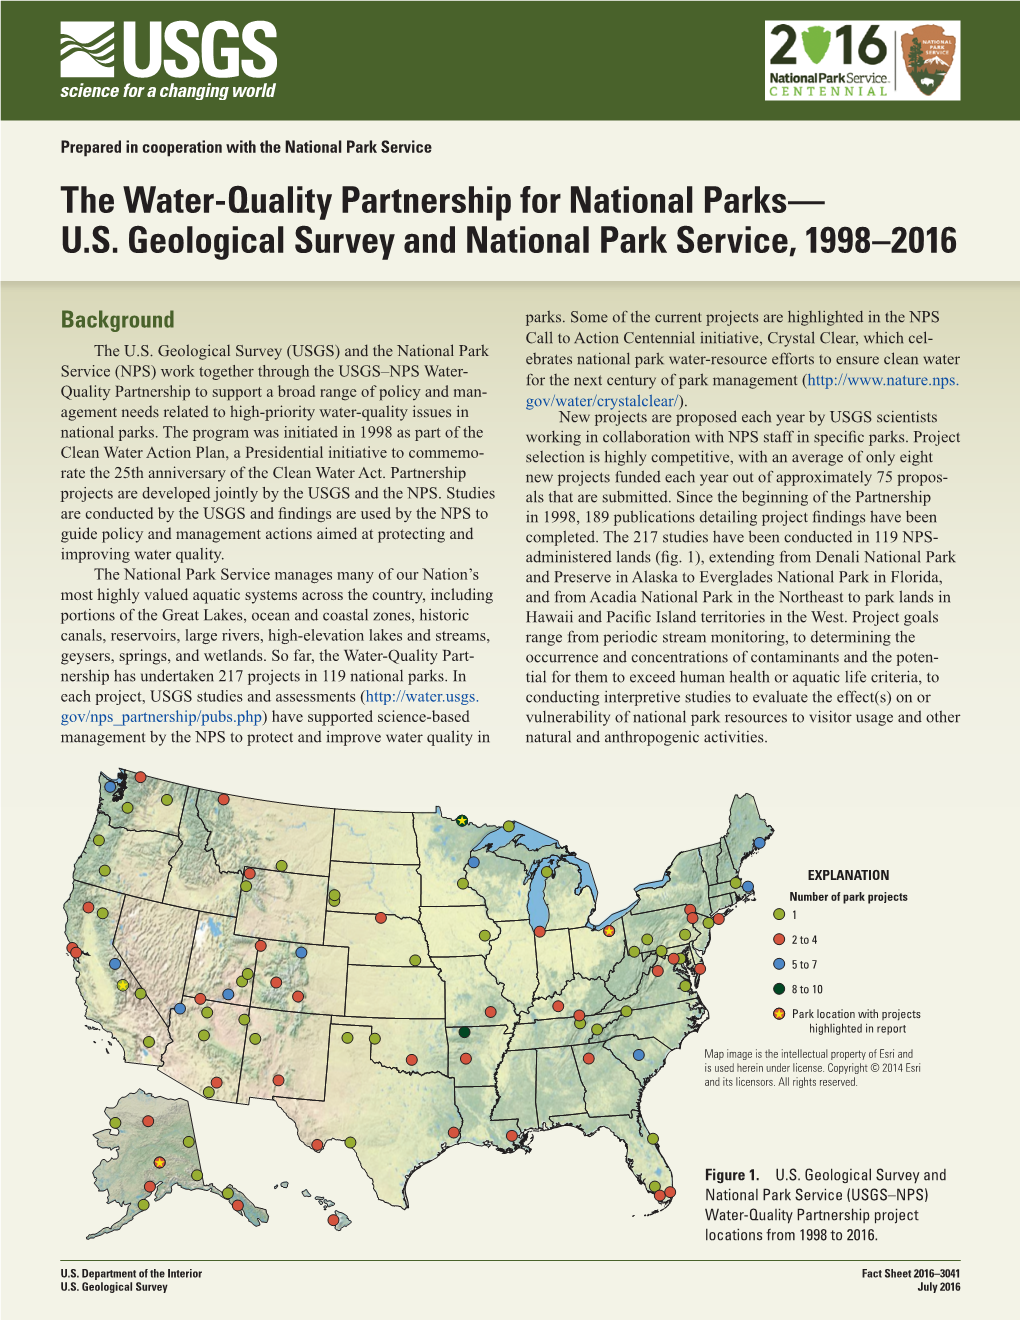 The Water-Quality Partnership for National Parks— U.S